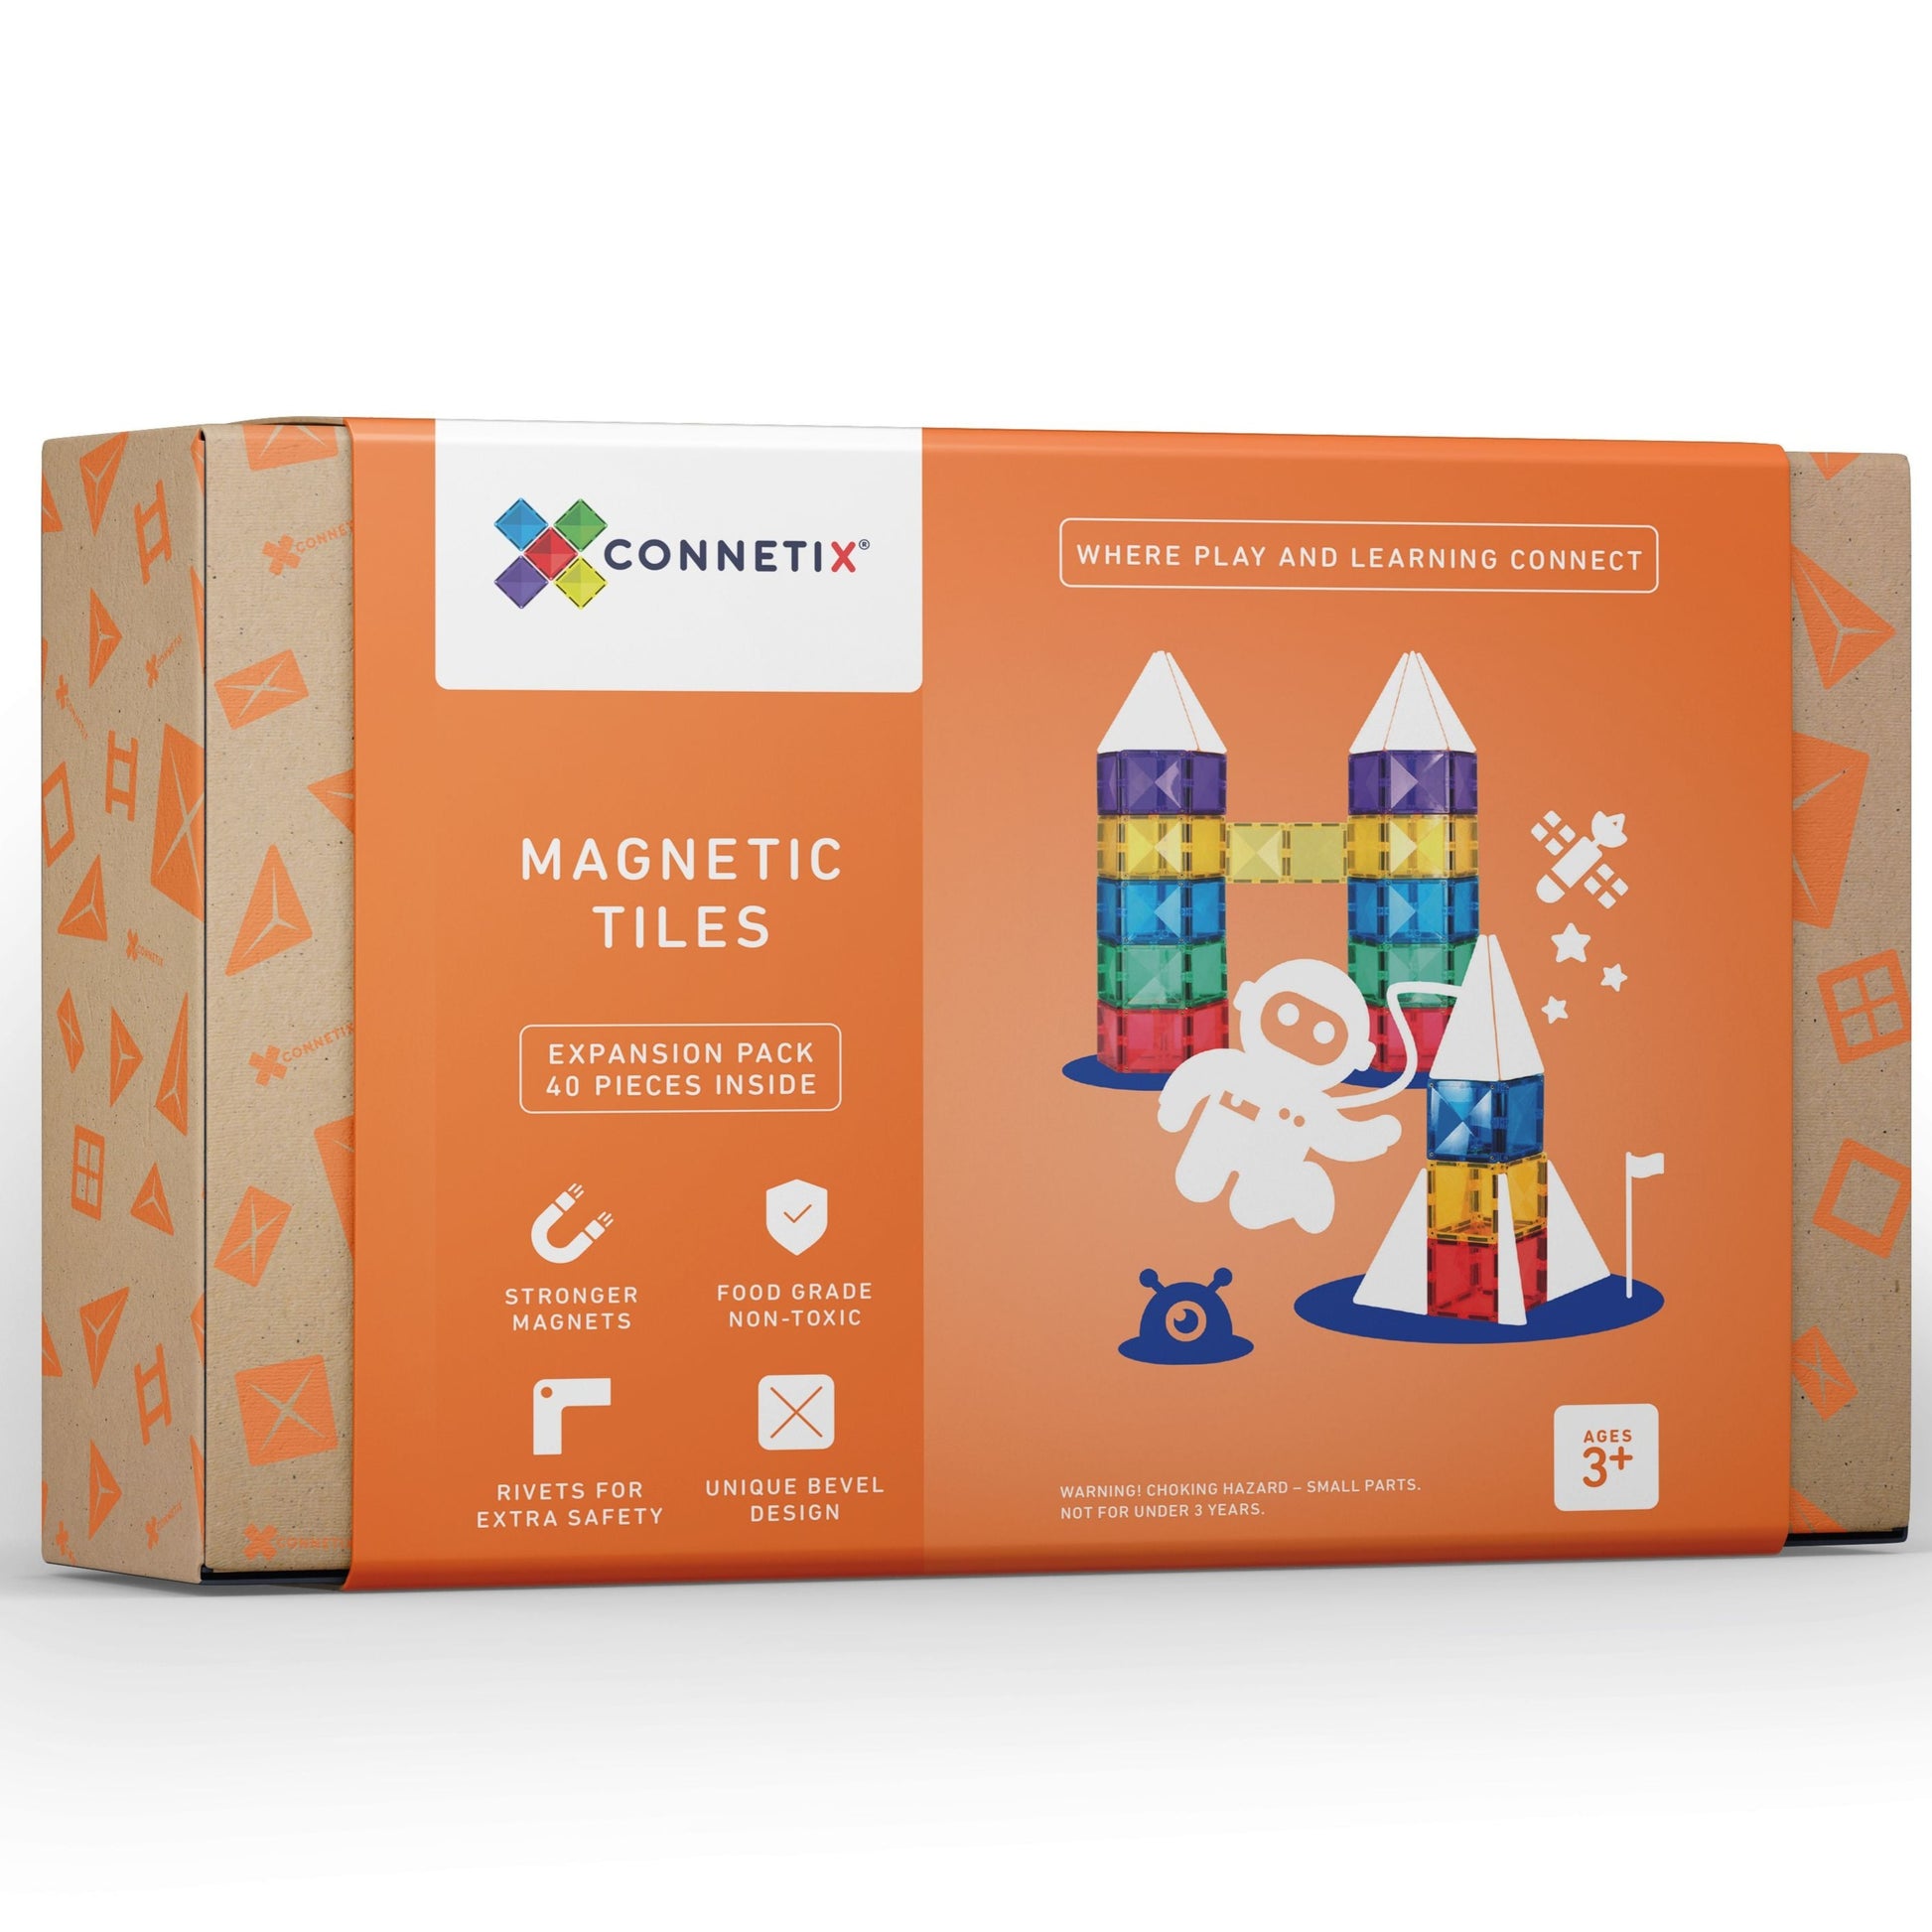 Connetix Tiles | 40 Piece Expansion Pack available at Bear & Moo